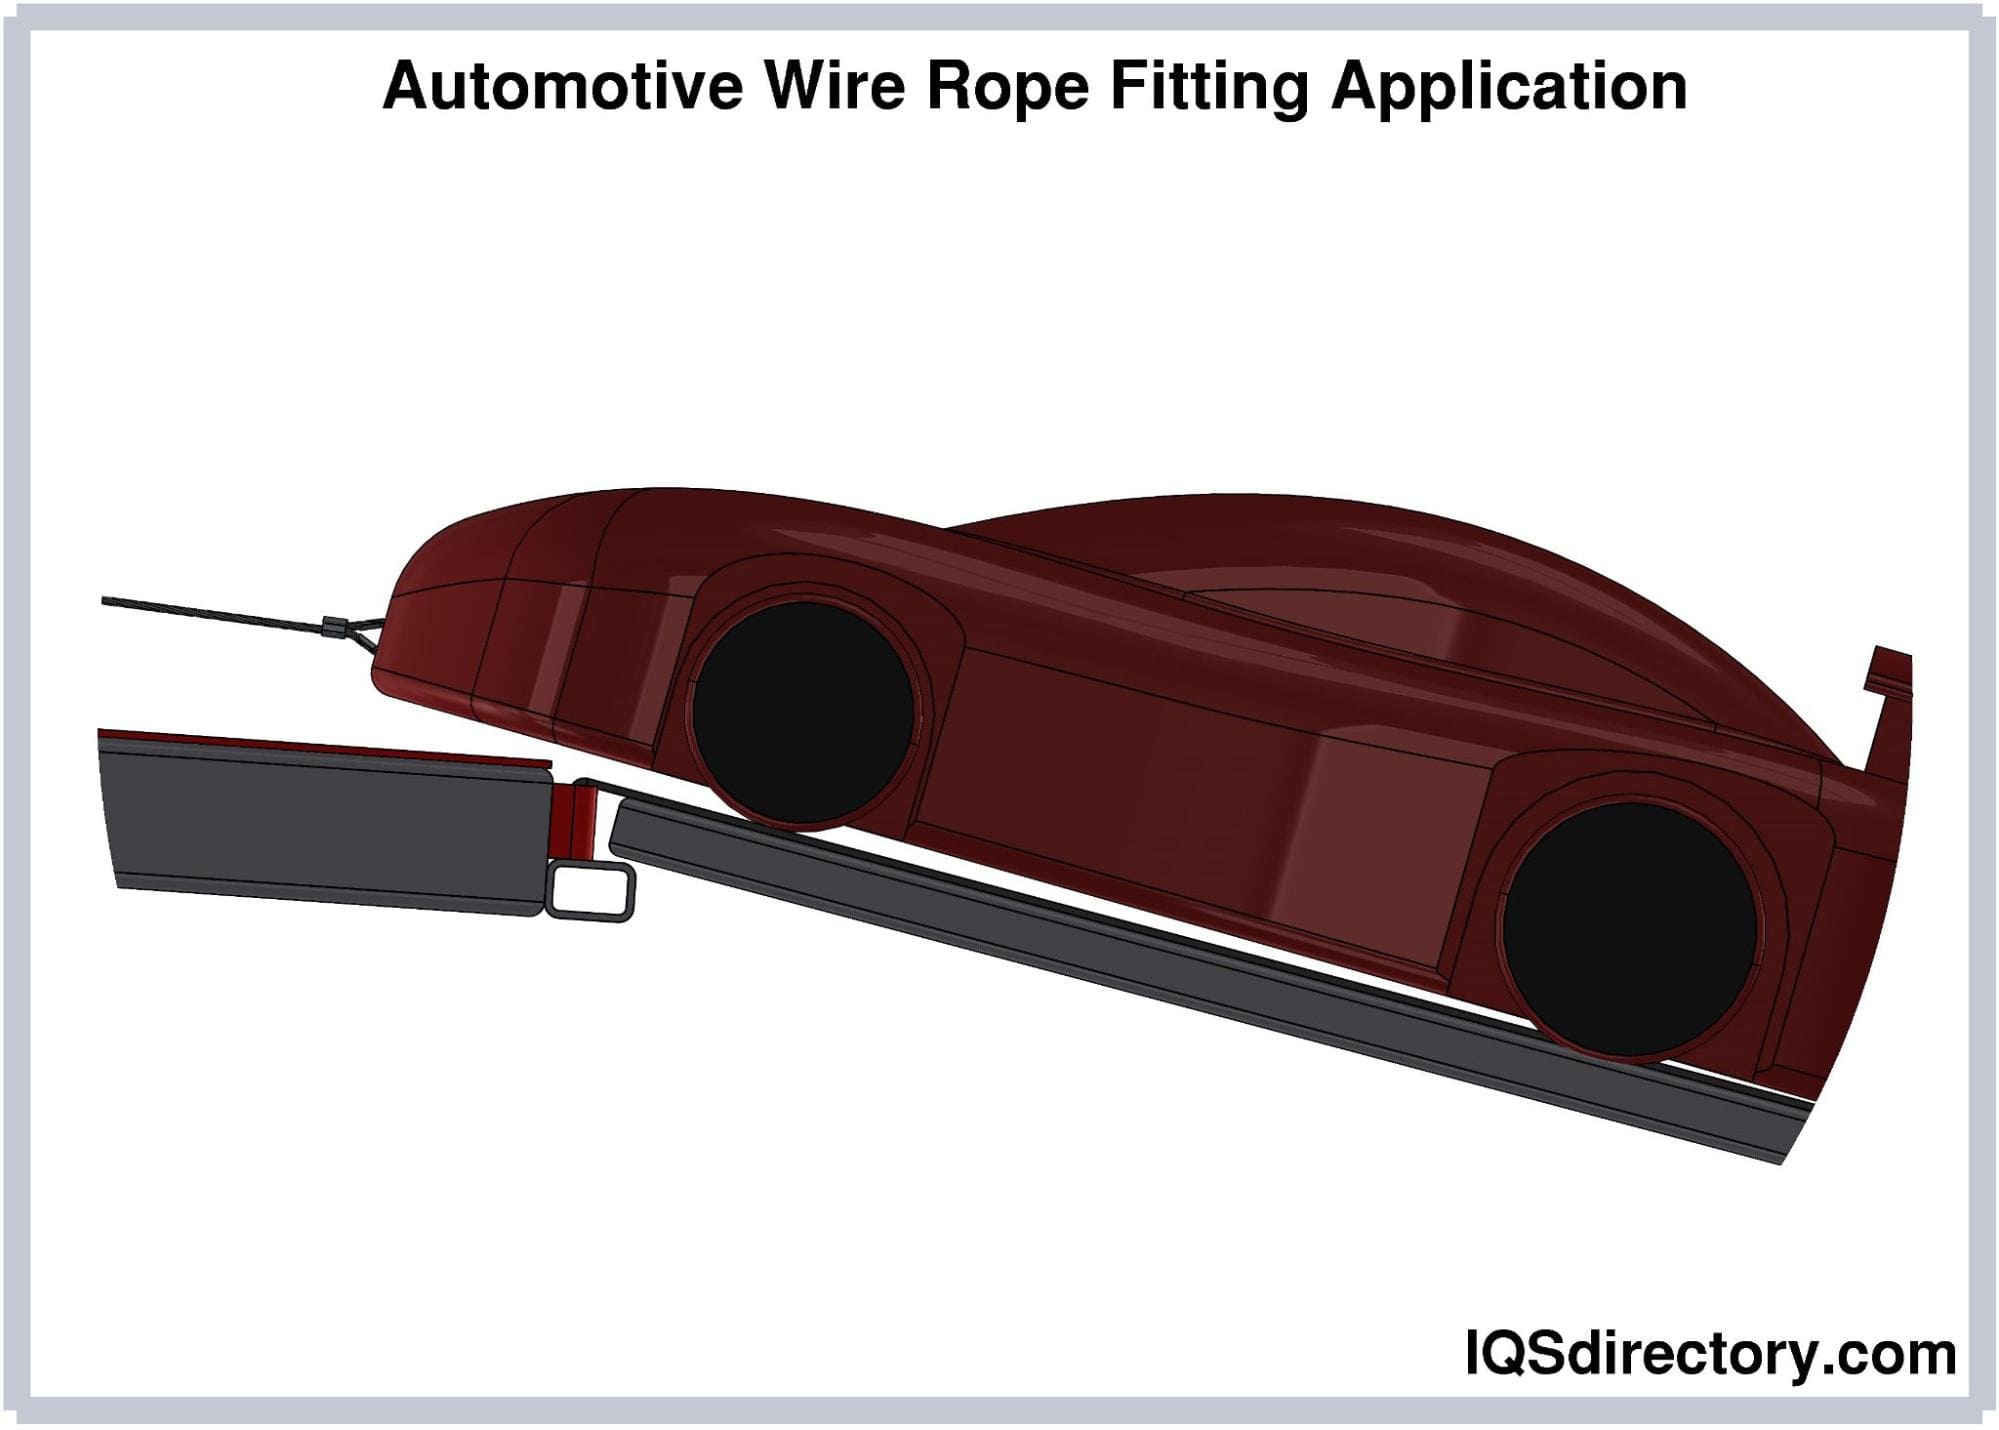 Automotive Wire Rope Fitting Application